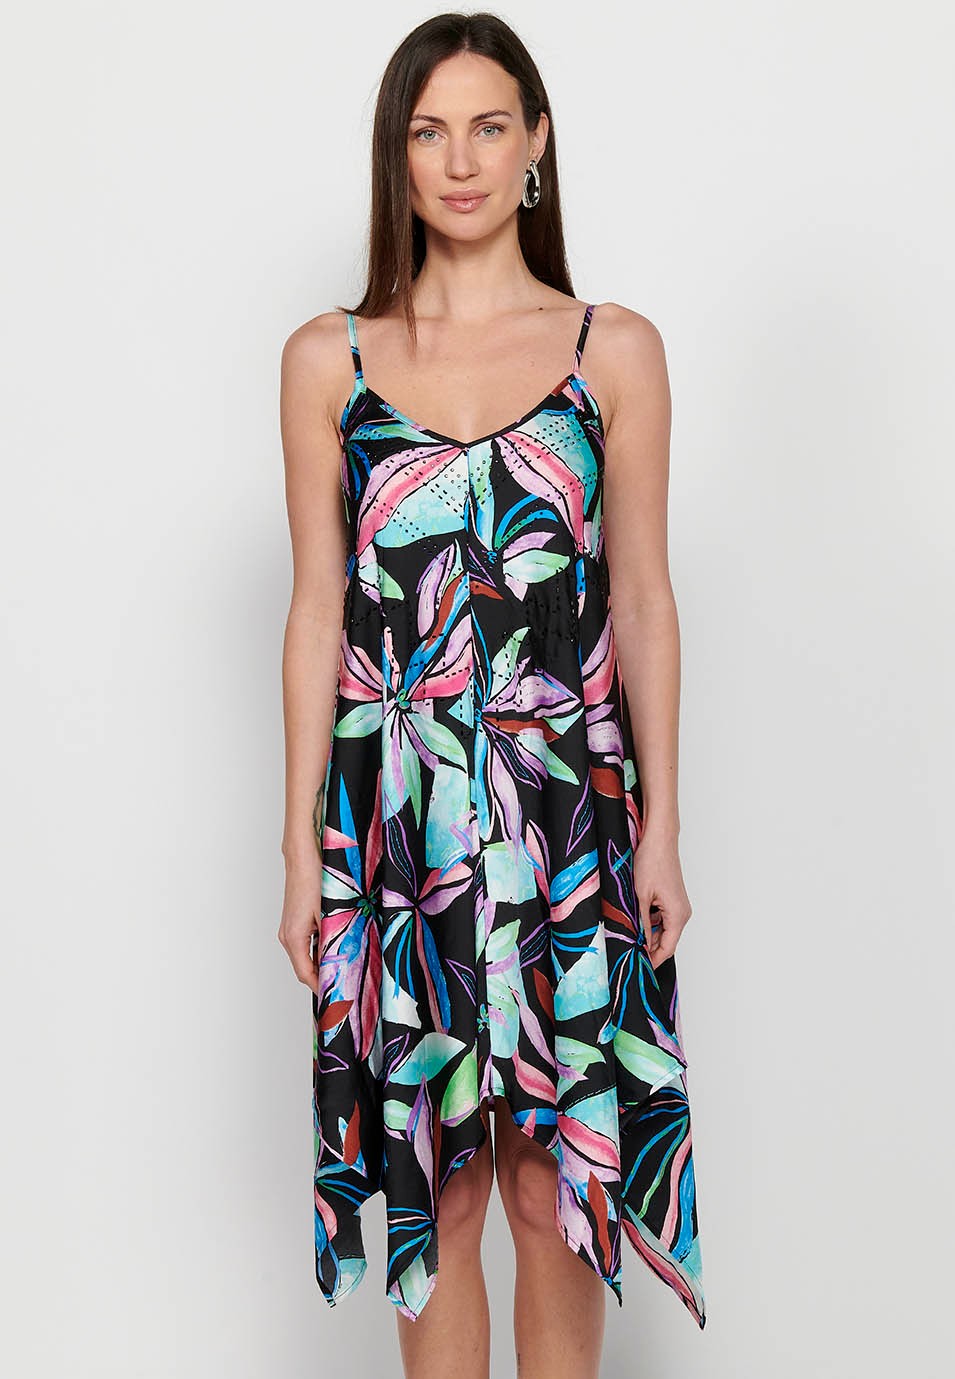 Midi dress with adjustable straps with sparkling neckline and long peaked finish with Multicolor floral print for Women 8